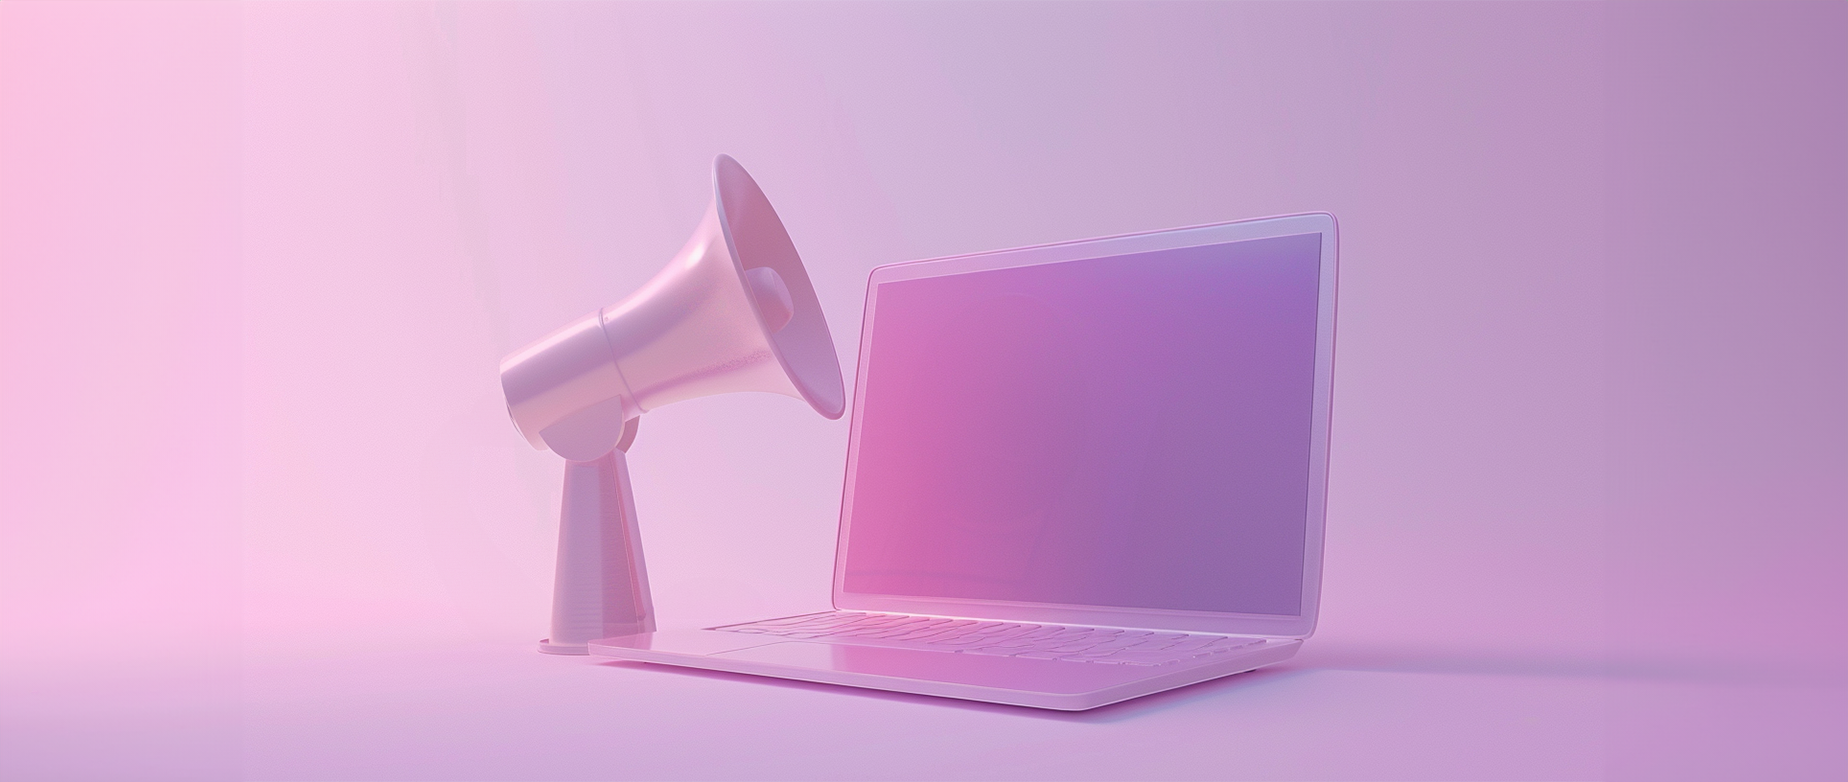 A pink room with a megaphone pointed at an open laptop.